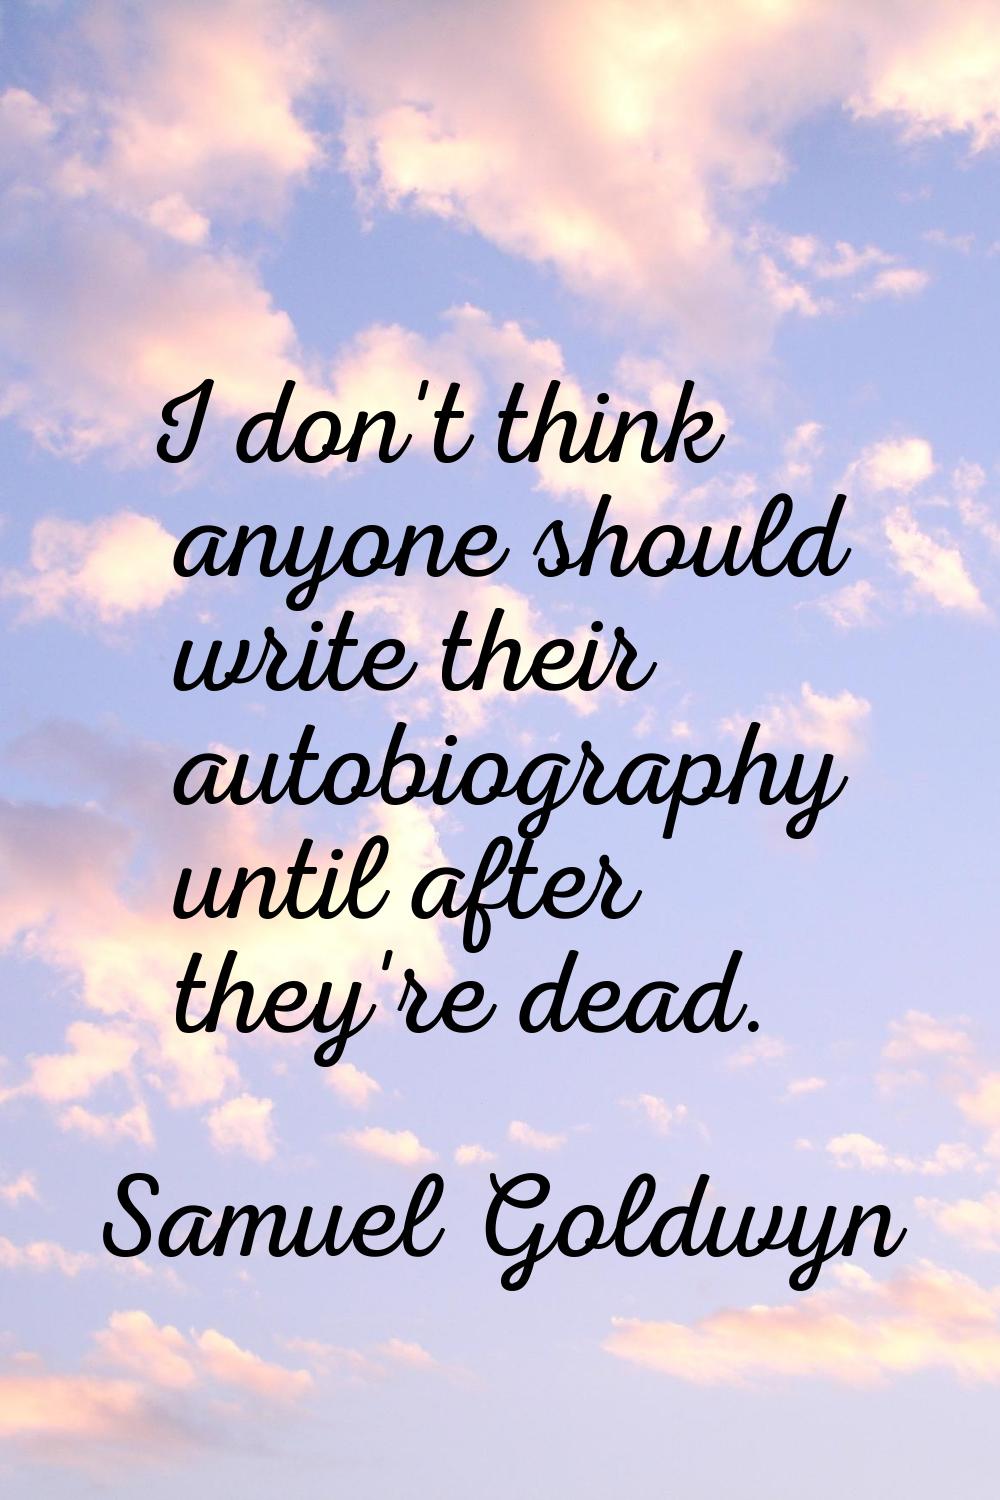 I don't think anyone should write their autobiography until after they're dead.